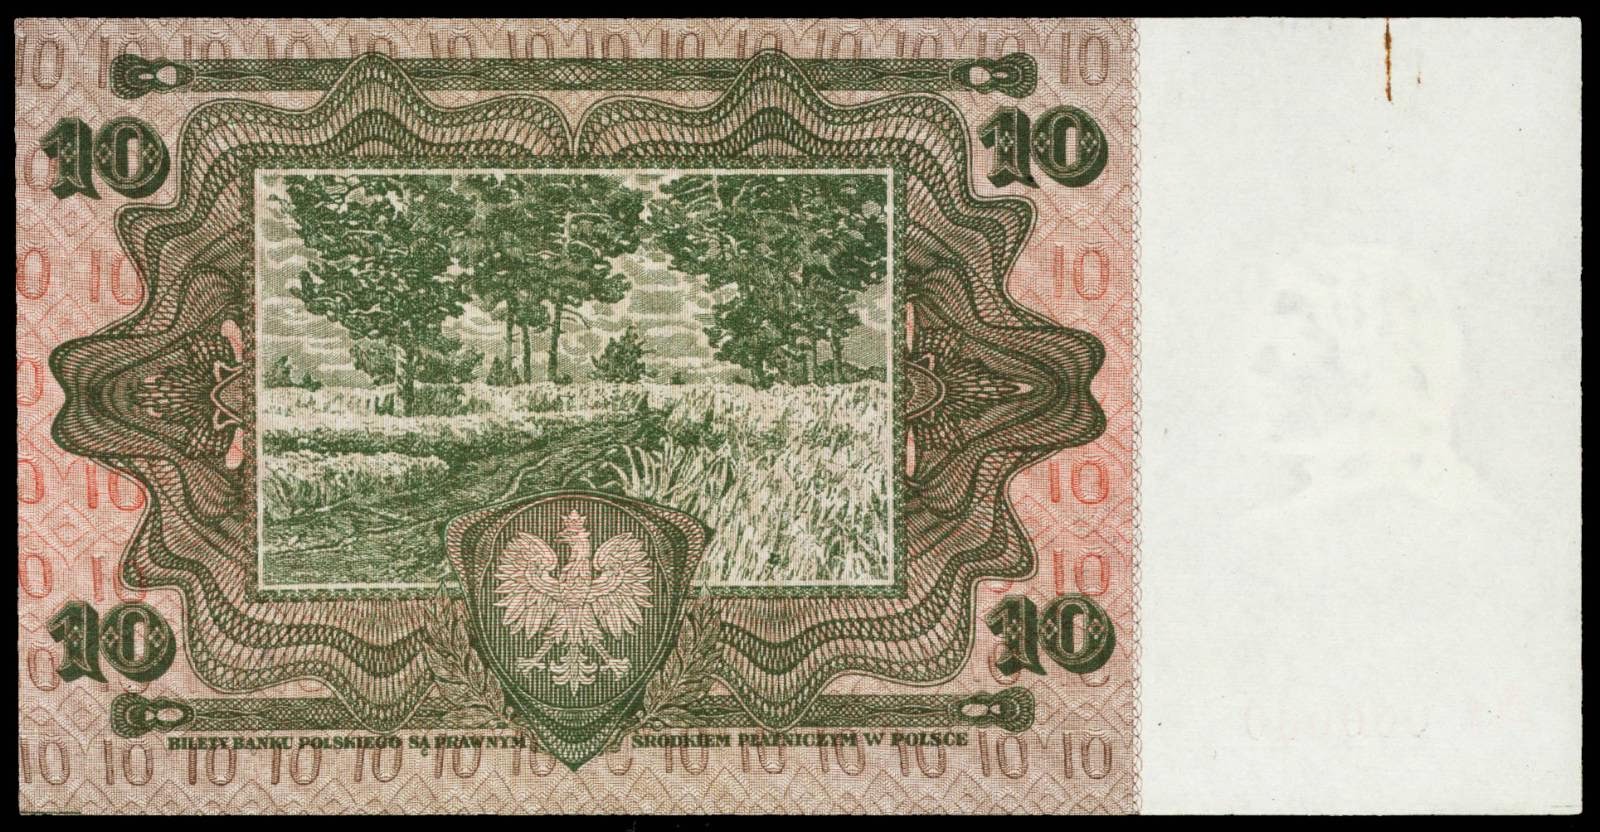 Poland 10 Zlotych banknote 1928|World Banknotes & Coins Pictures | Old ...